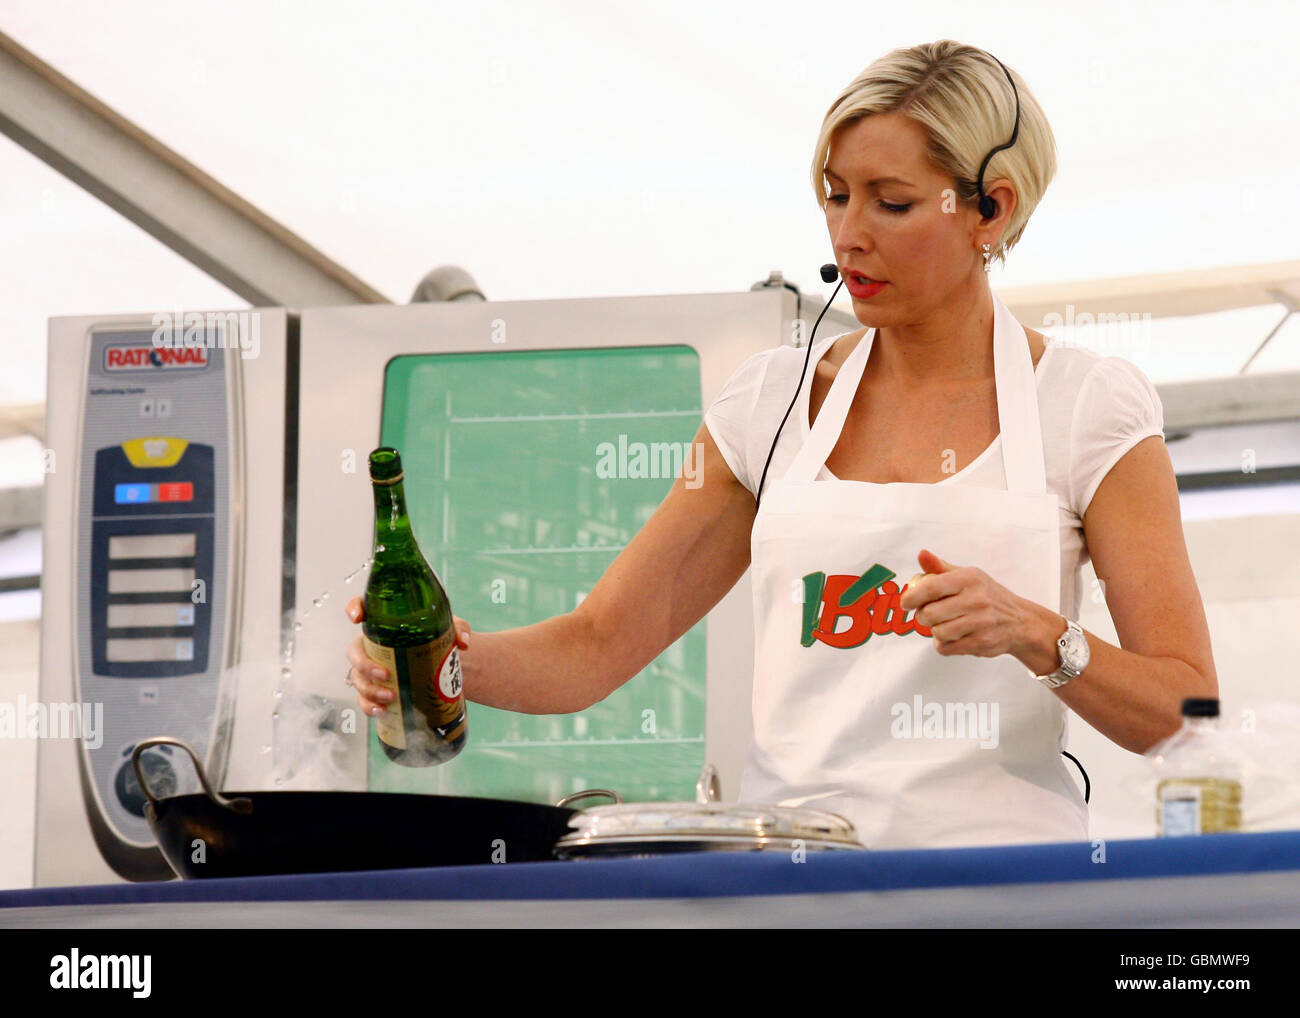 Heather Mills gives a vegan cookery demonstration in Brighton, East Sussex, as part of the Brighton Food Festival. Stock Photo